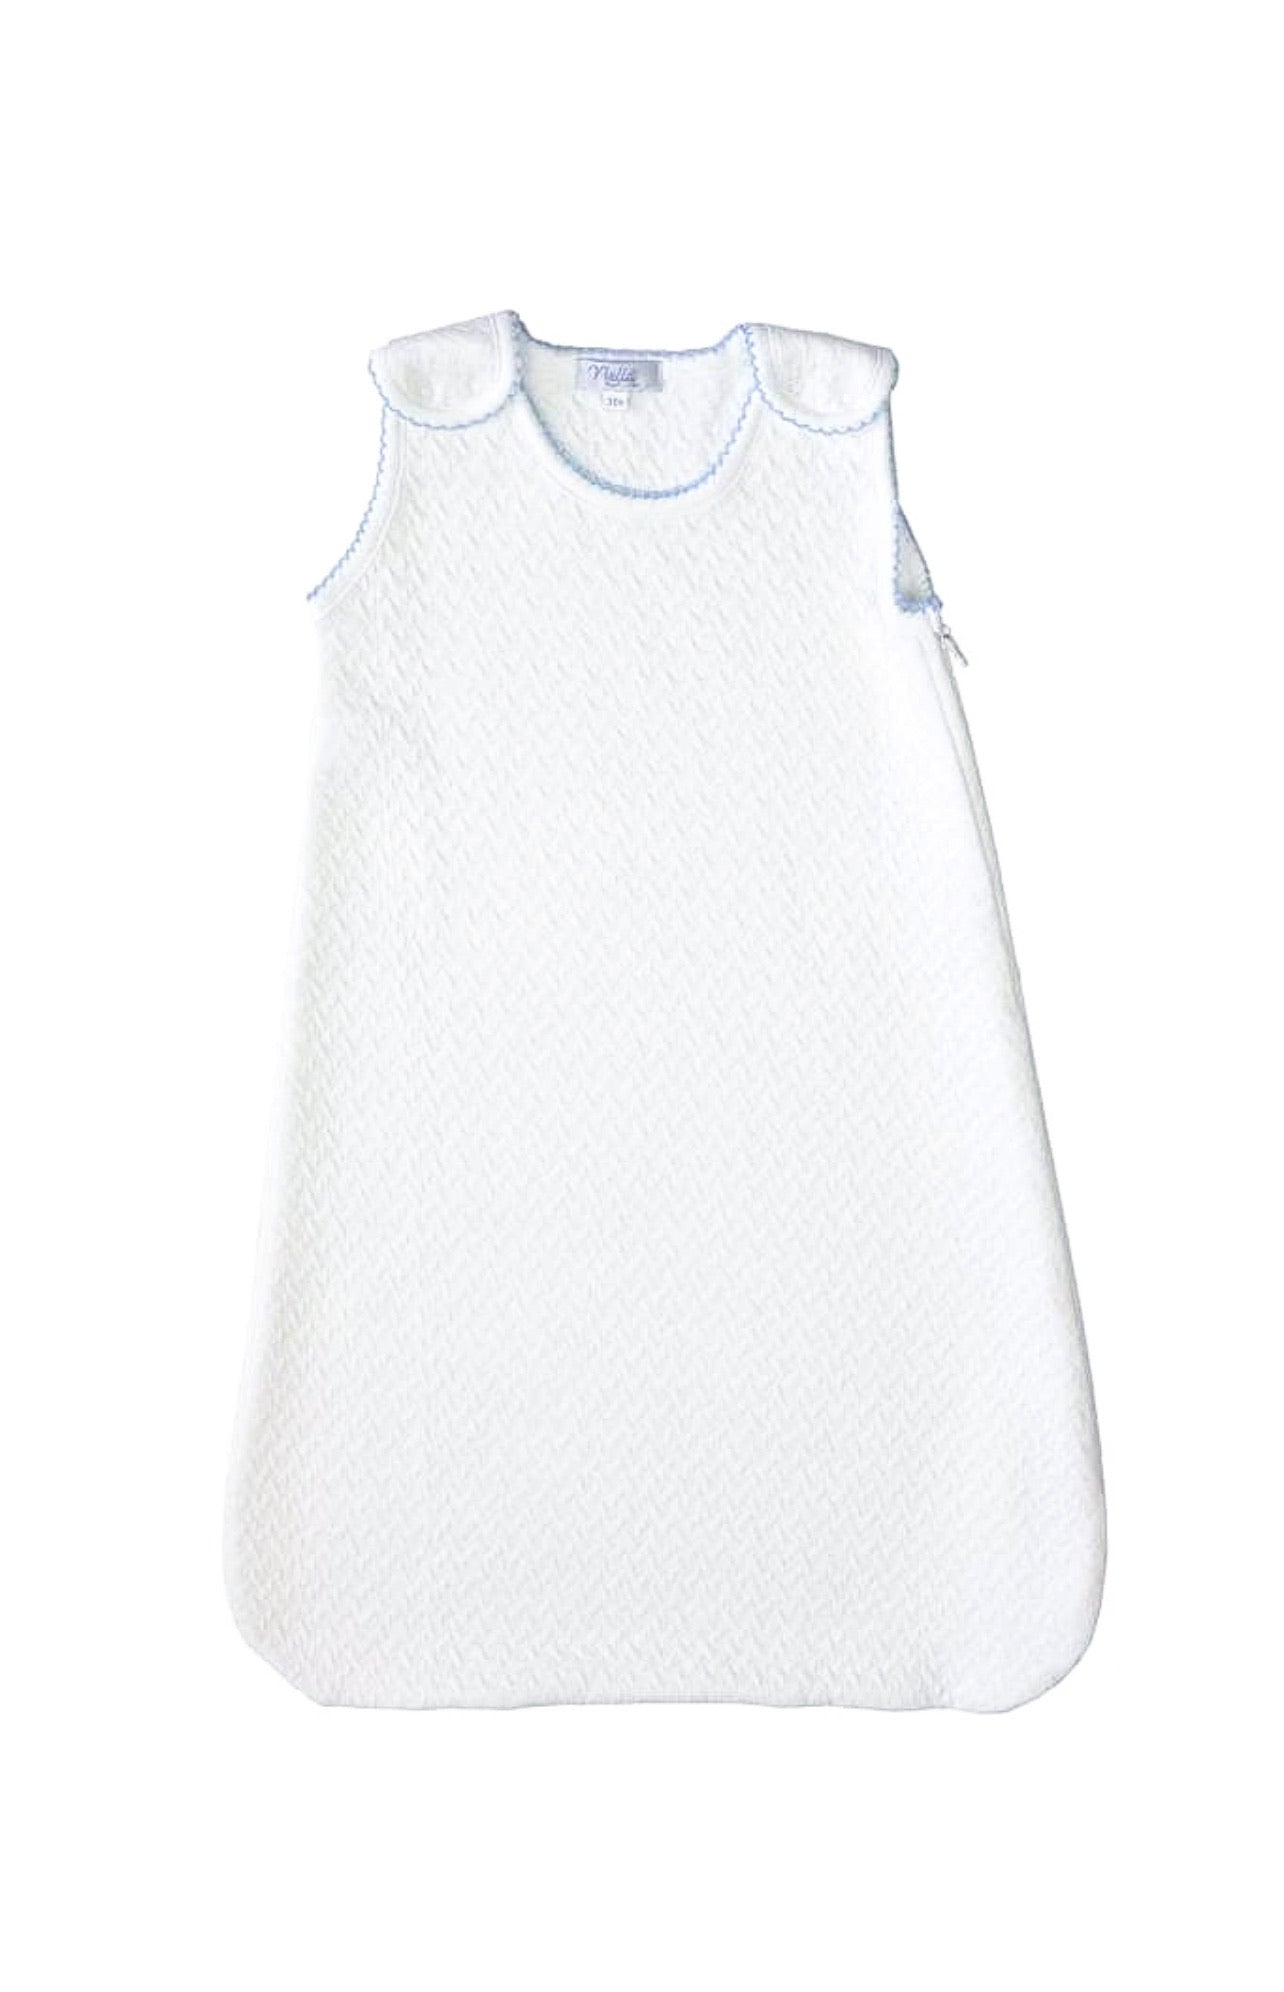 Quilted Pima Baby Sack: White/Blue